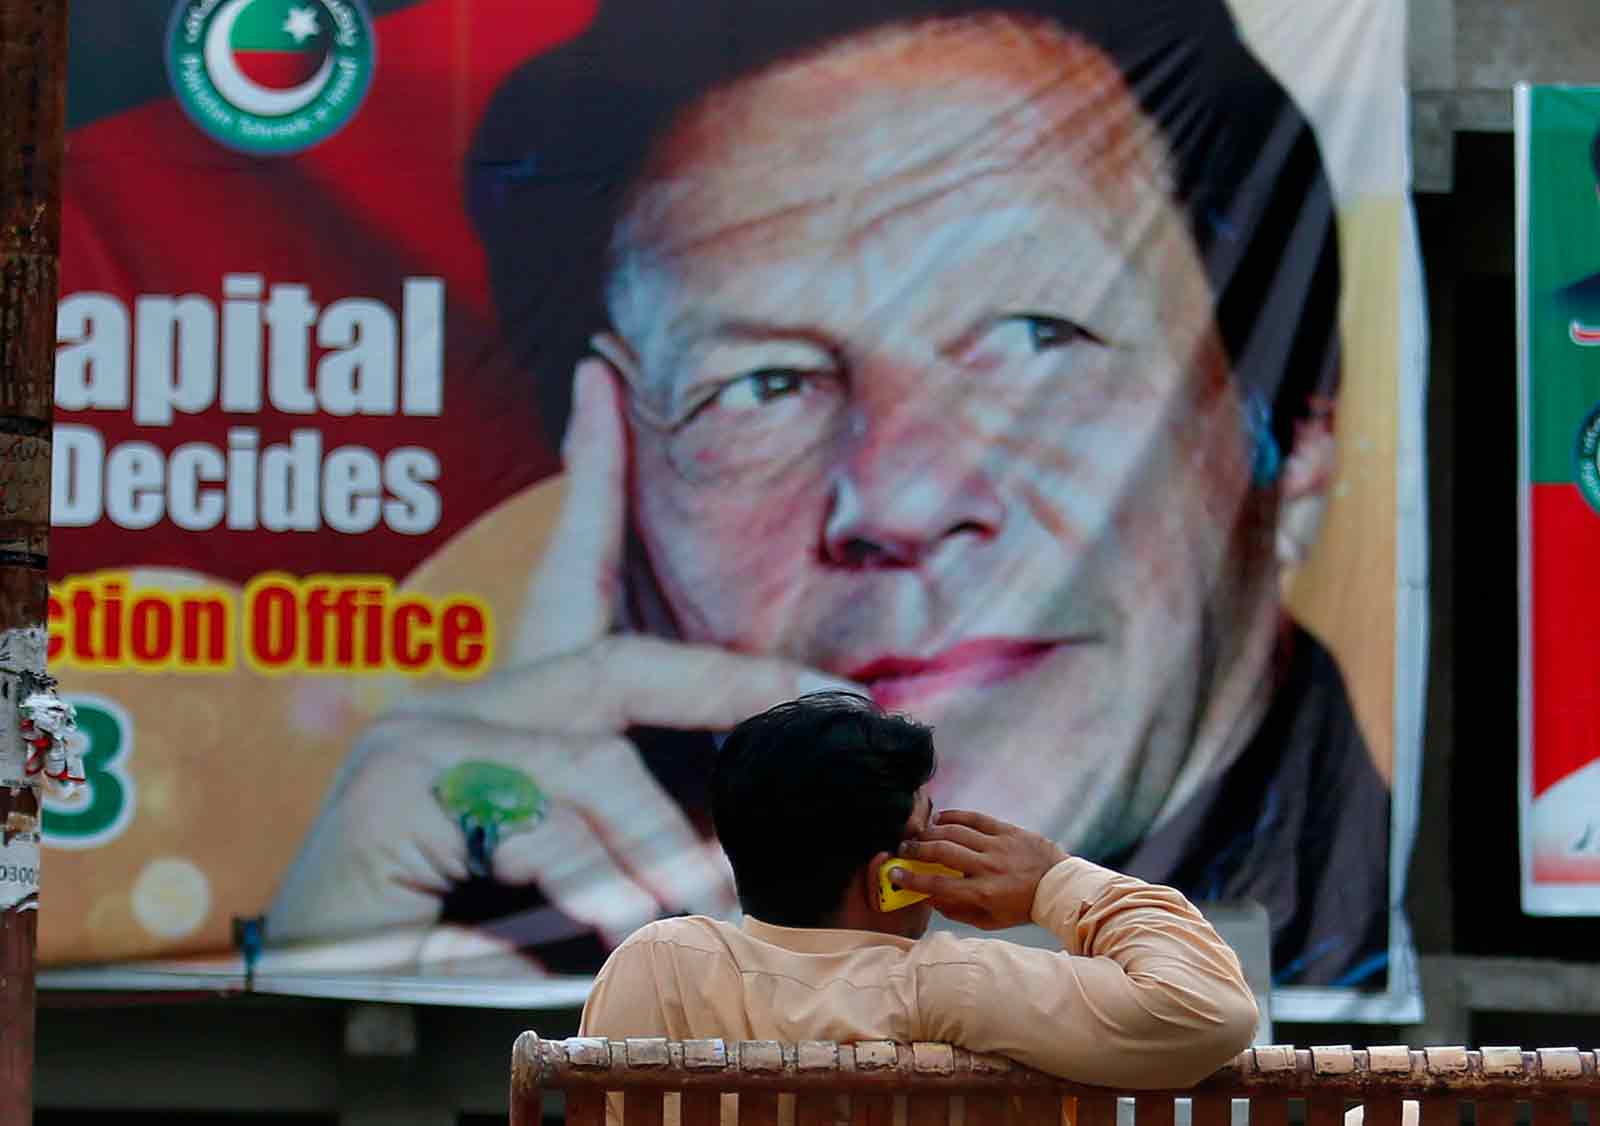 A man on his cell phone sitting in front of a poster showing Imran Khan, head of the Pakistan Tehreek-e-Insaf party, which won this past week’s elections, Islamabad, Pakistan, July 28, 2018